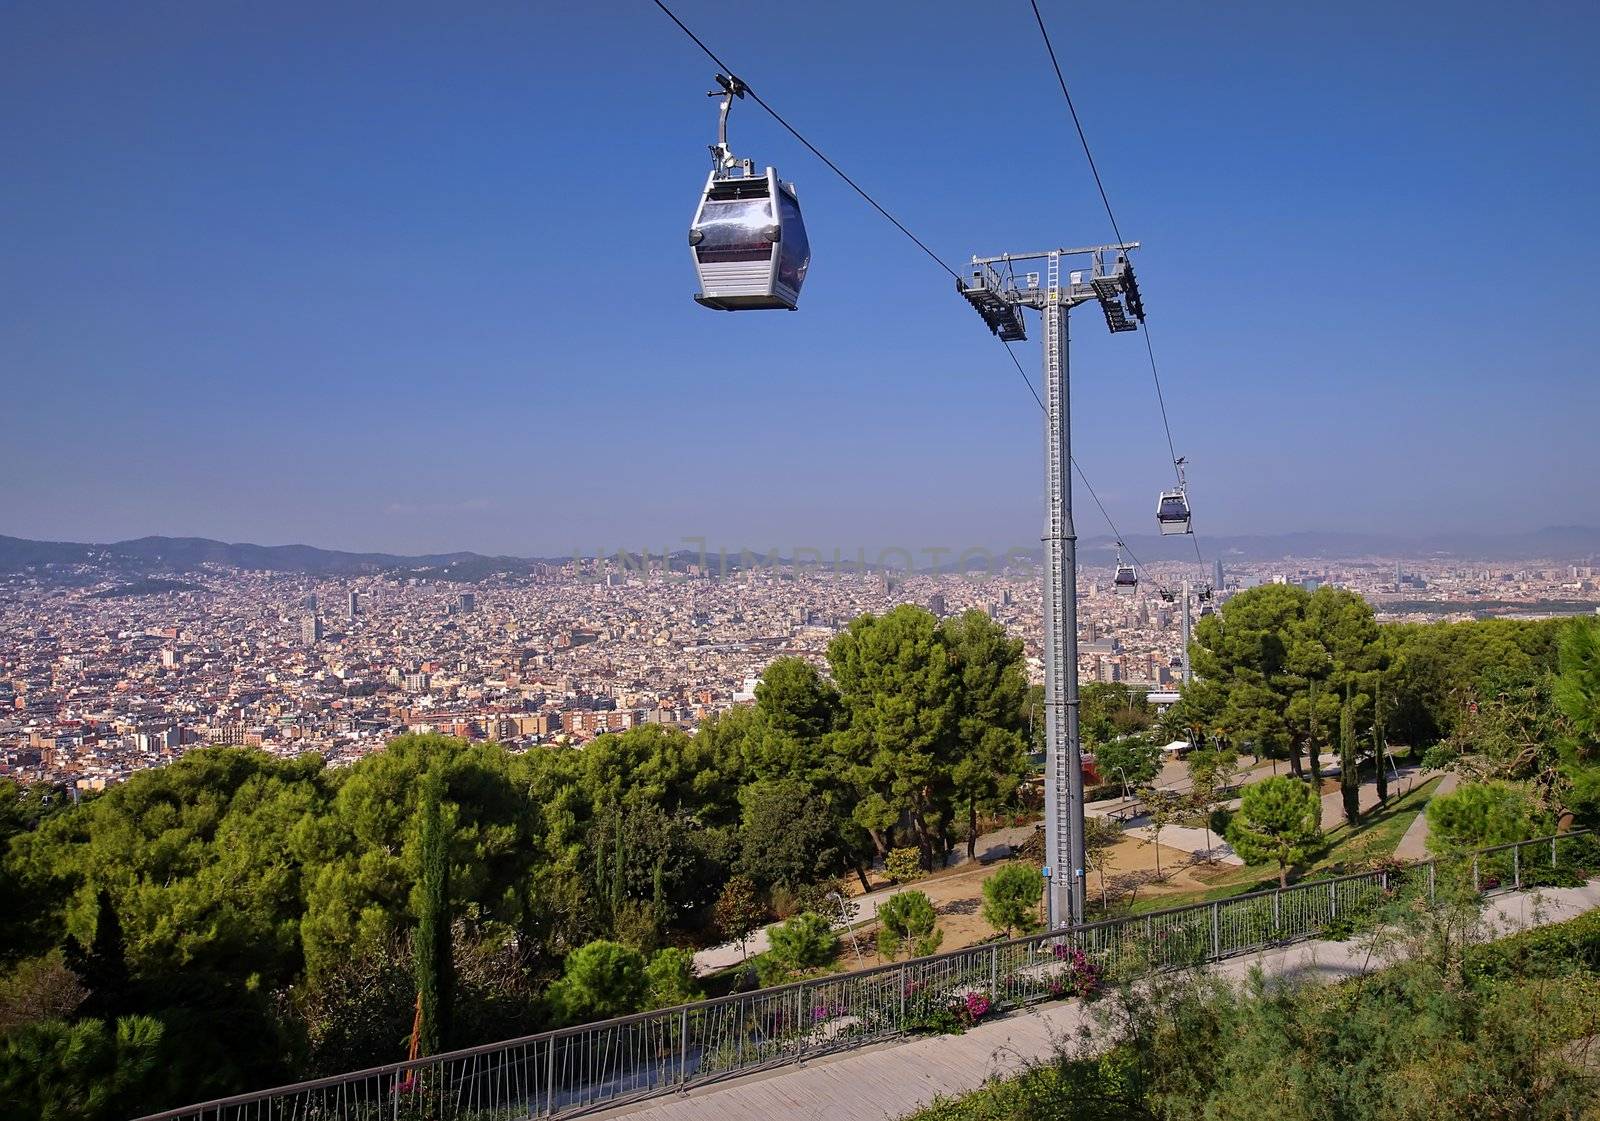 Barcelona city and cable car from Montjuic hill